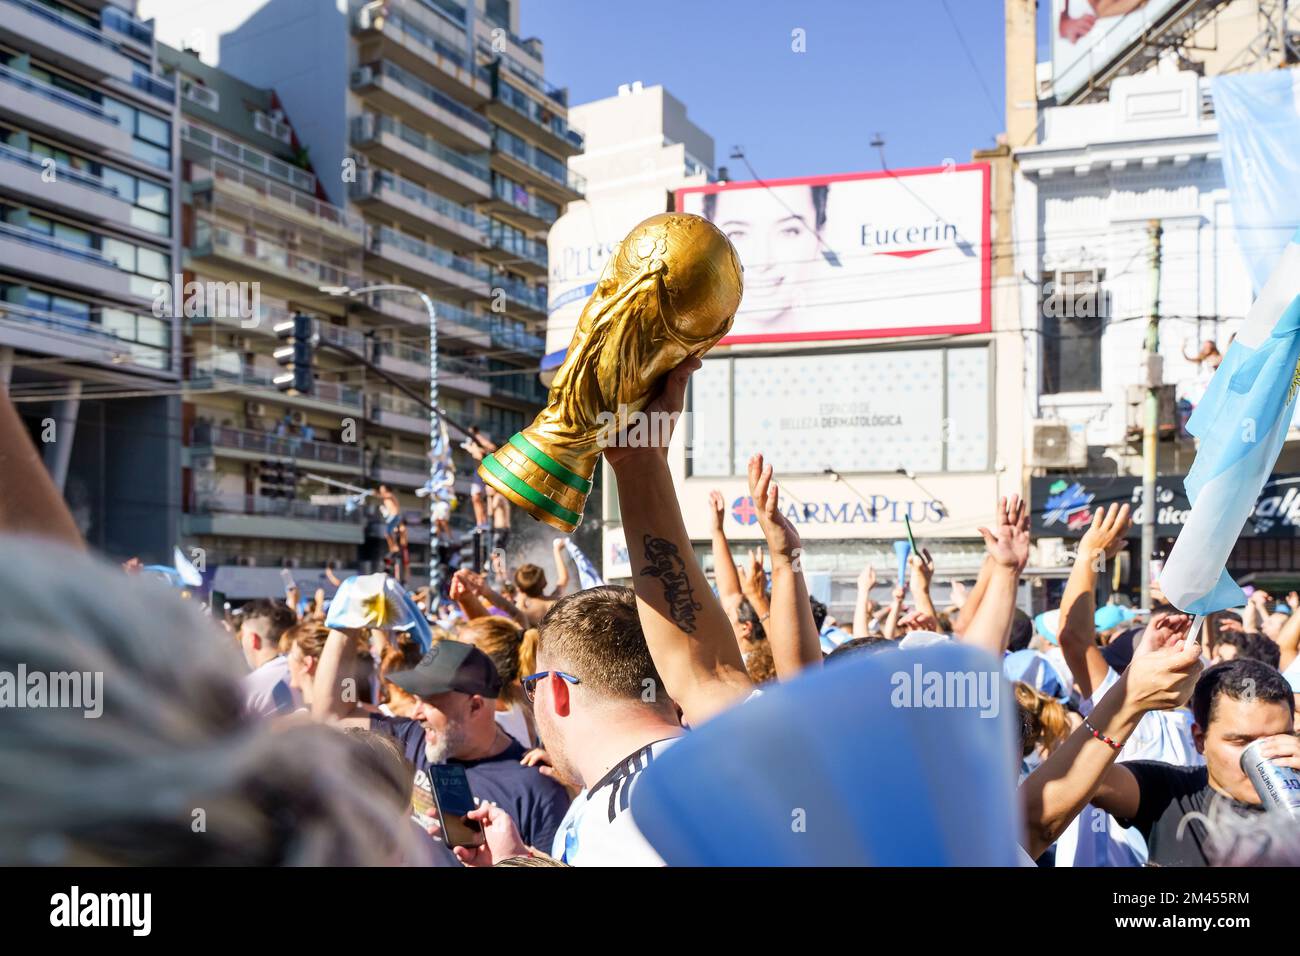 Buenos Aires, Argentina - December 18, 2022: Happy Argentine football fans celebrate winning a final football match at the Qatar 2022 FIFA World Cup. High quality photo Stock Photo